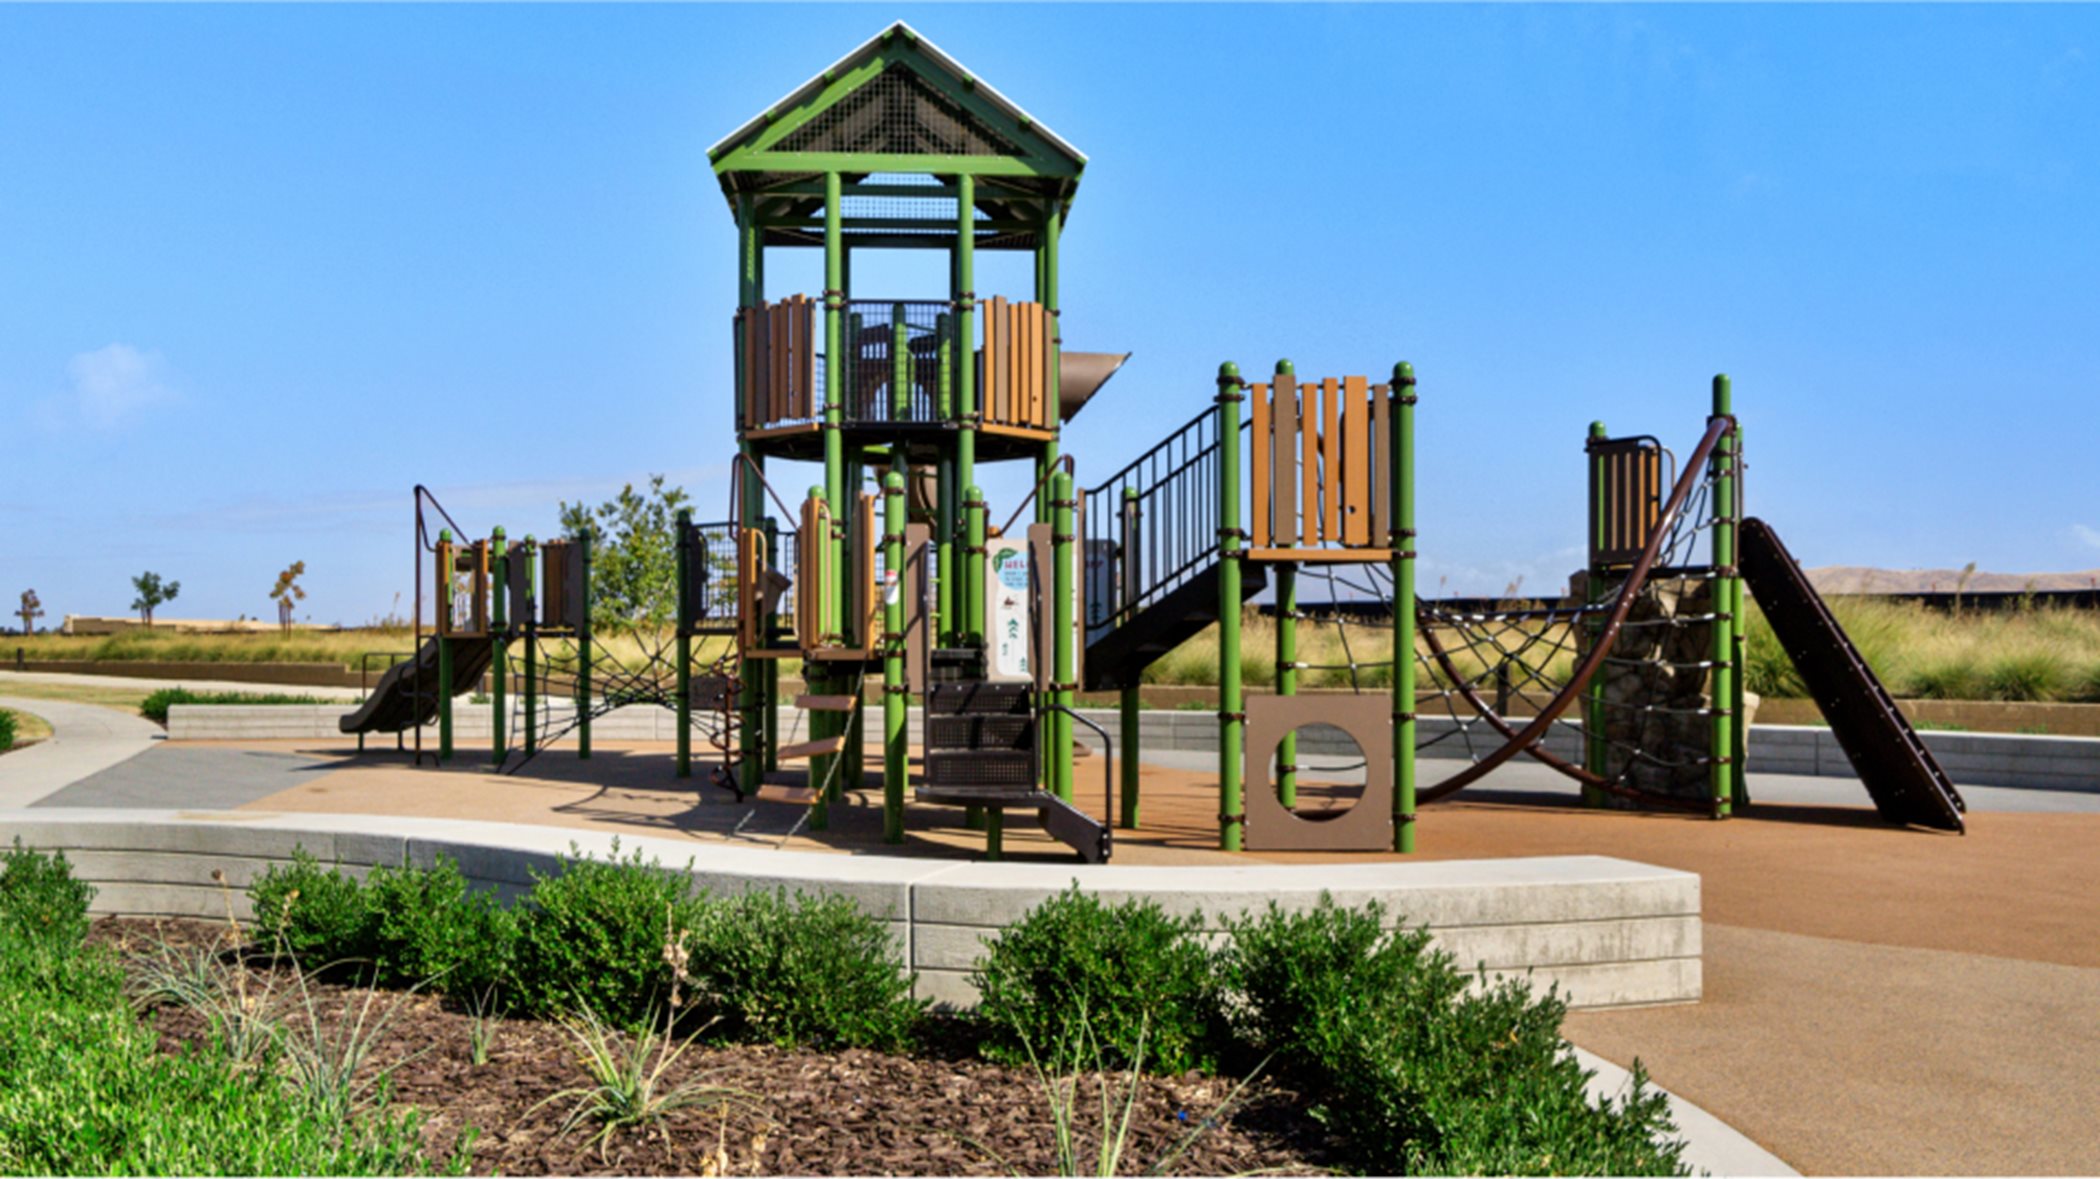 Ranch at Heritage Grove playground amenity